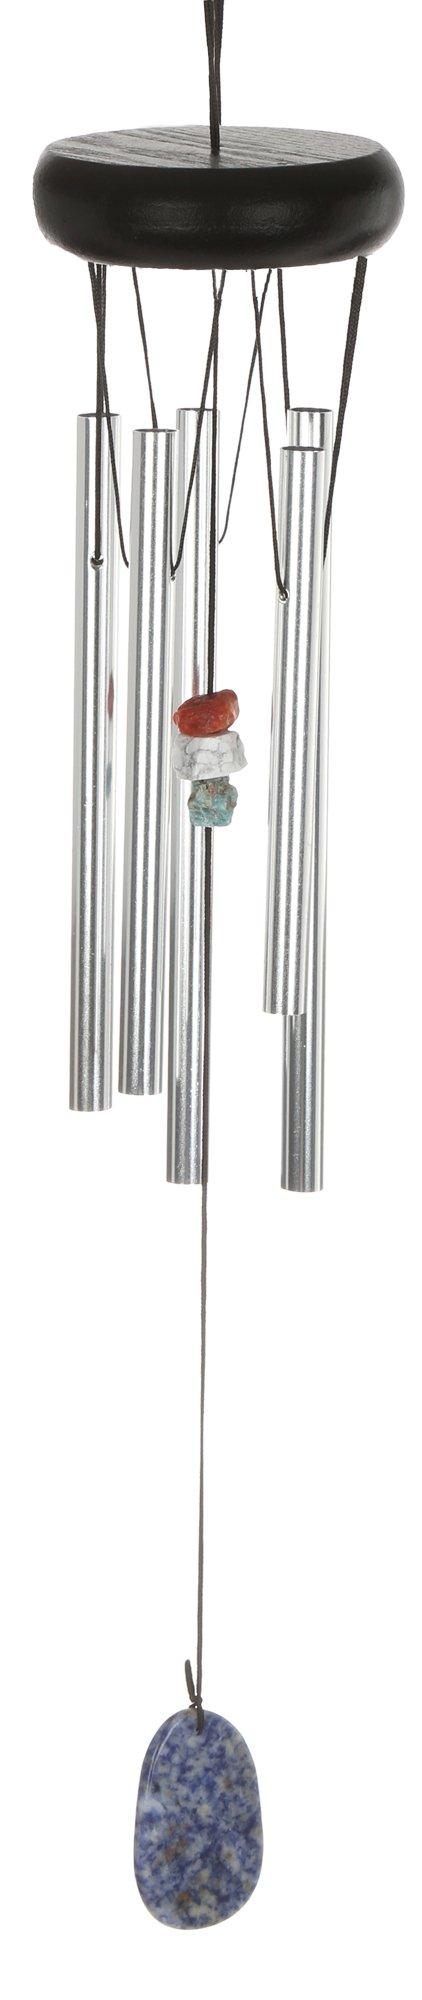 20 in Small Stone Wind Chime